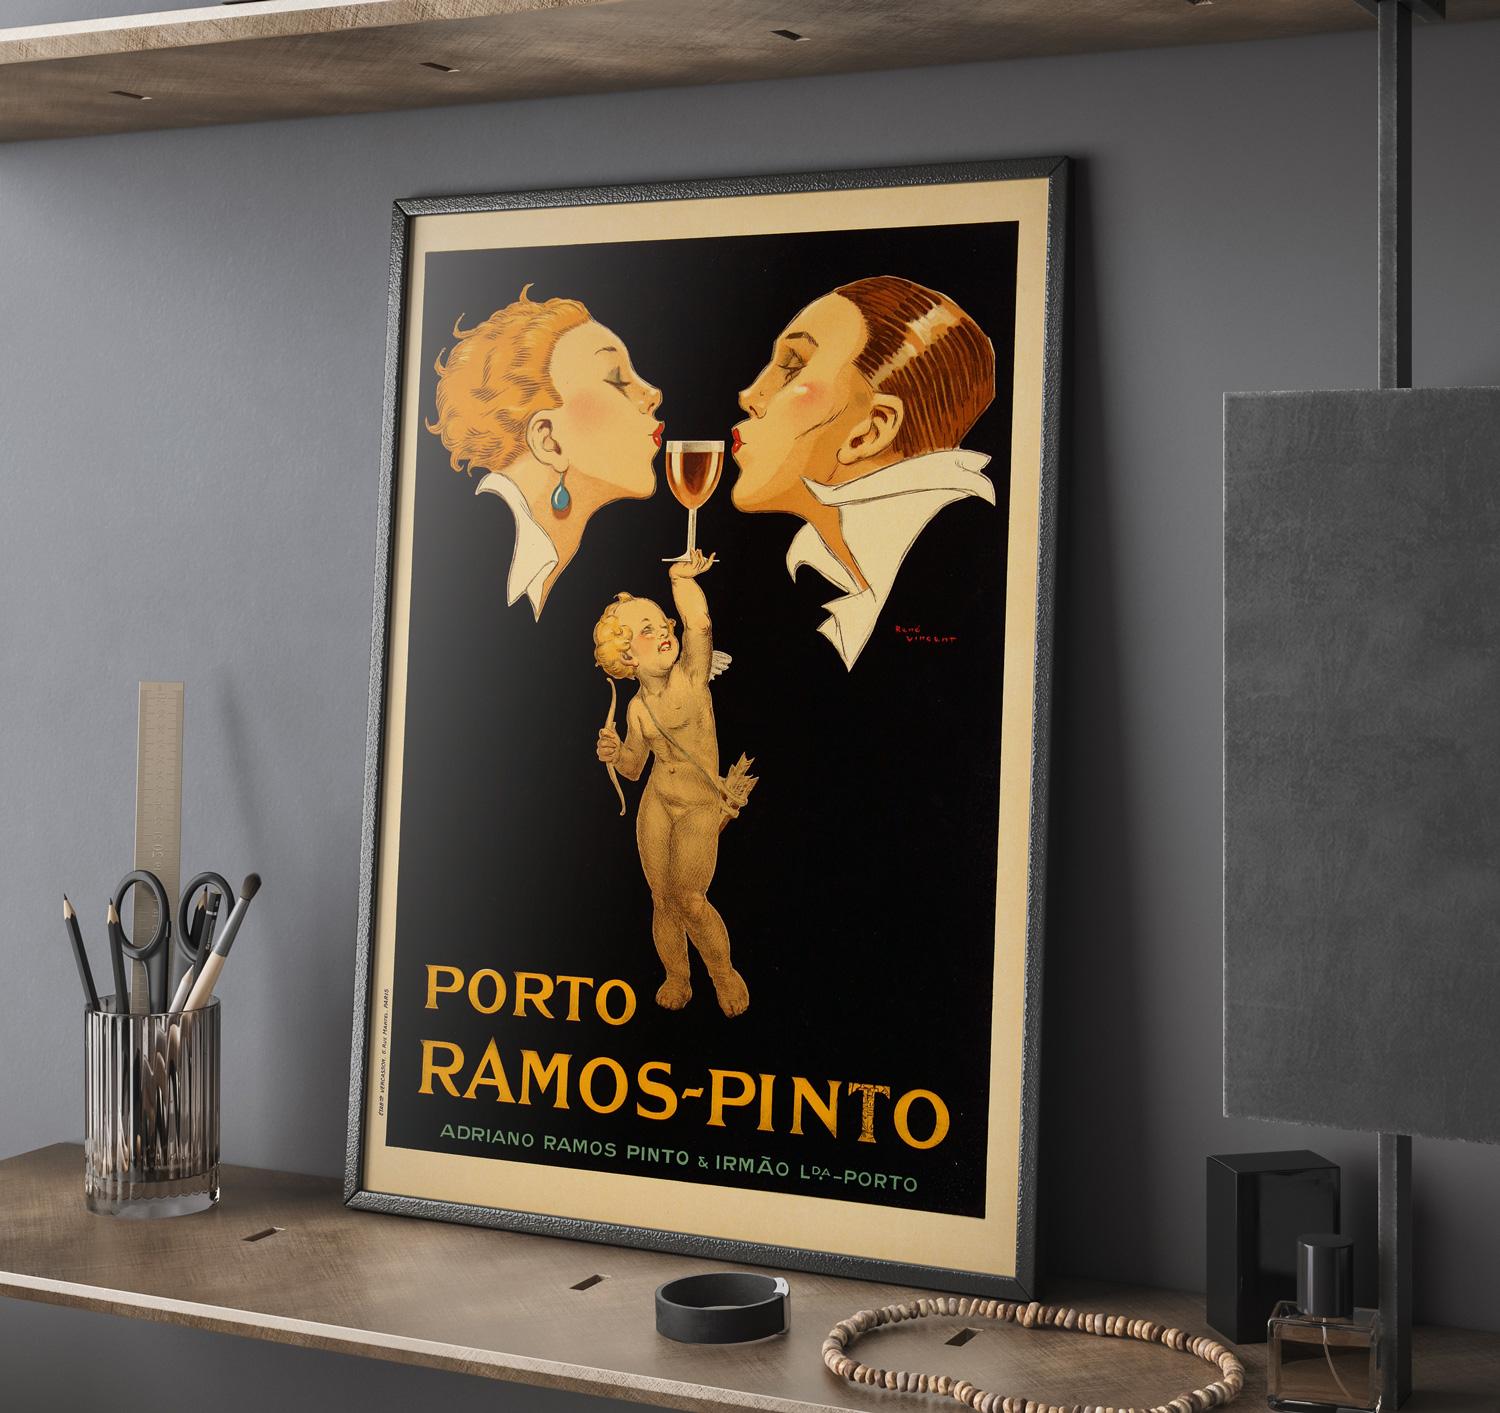 Original vintage French Porto Ramos advertising poster from circa 1920. Founded by Adriano Ramos Pinto in 1880, Casa Ramos Pinto soon made itself known for its innovative and pioneering strategy.

As illustrated by this poster featuring the iconic